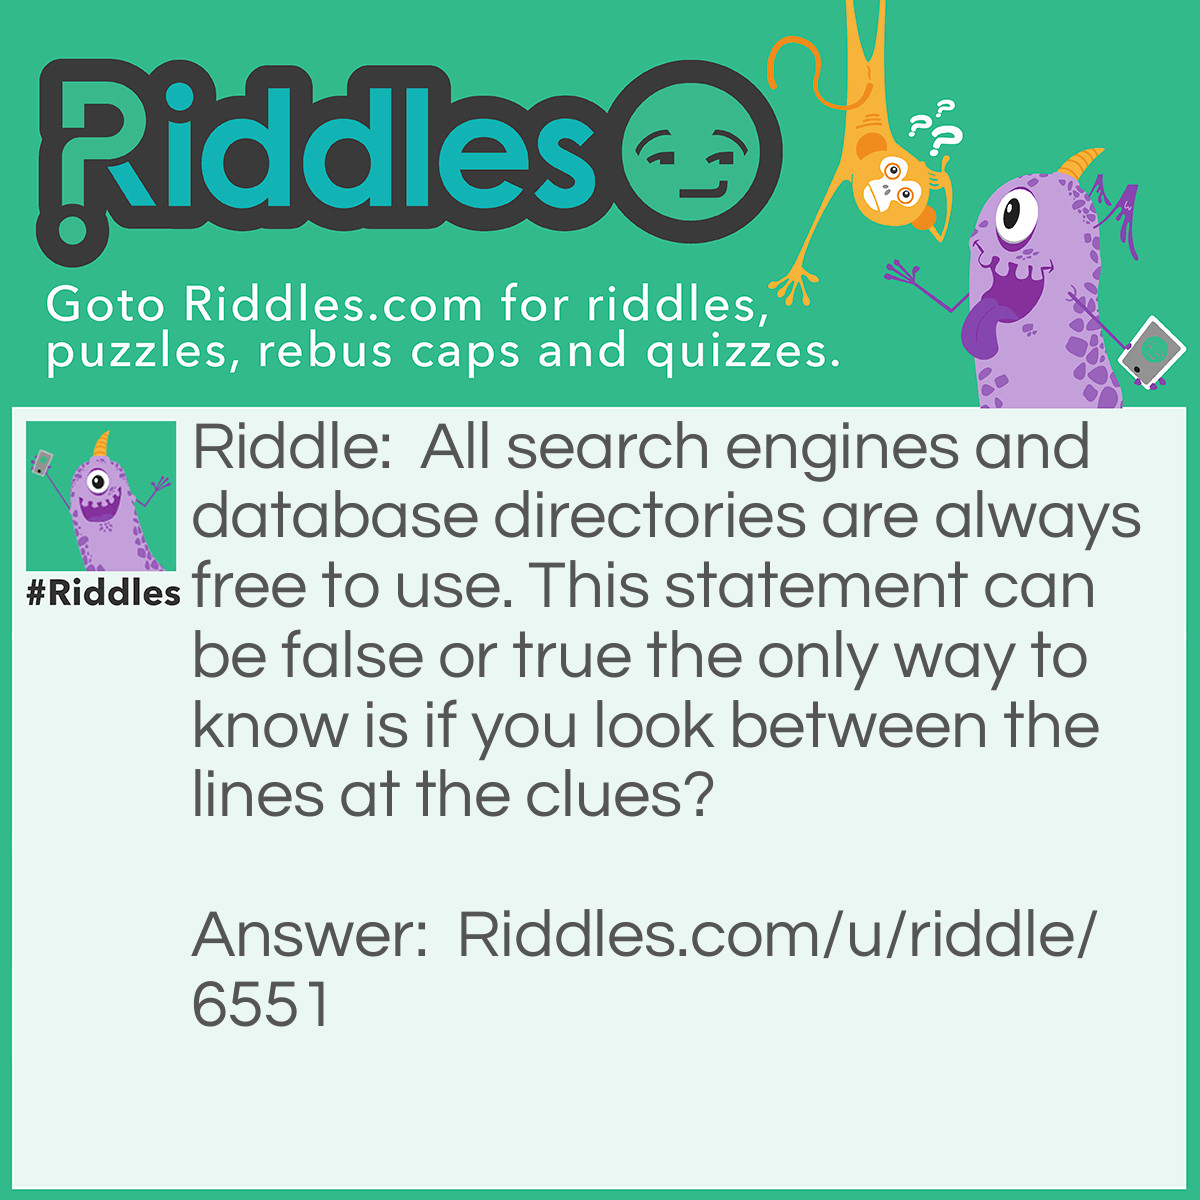 Riddle: All search engines and database directories are always free to use. This statement can be false or true the only way to know is if you look between the lines at the clues? Answer: False